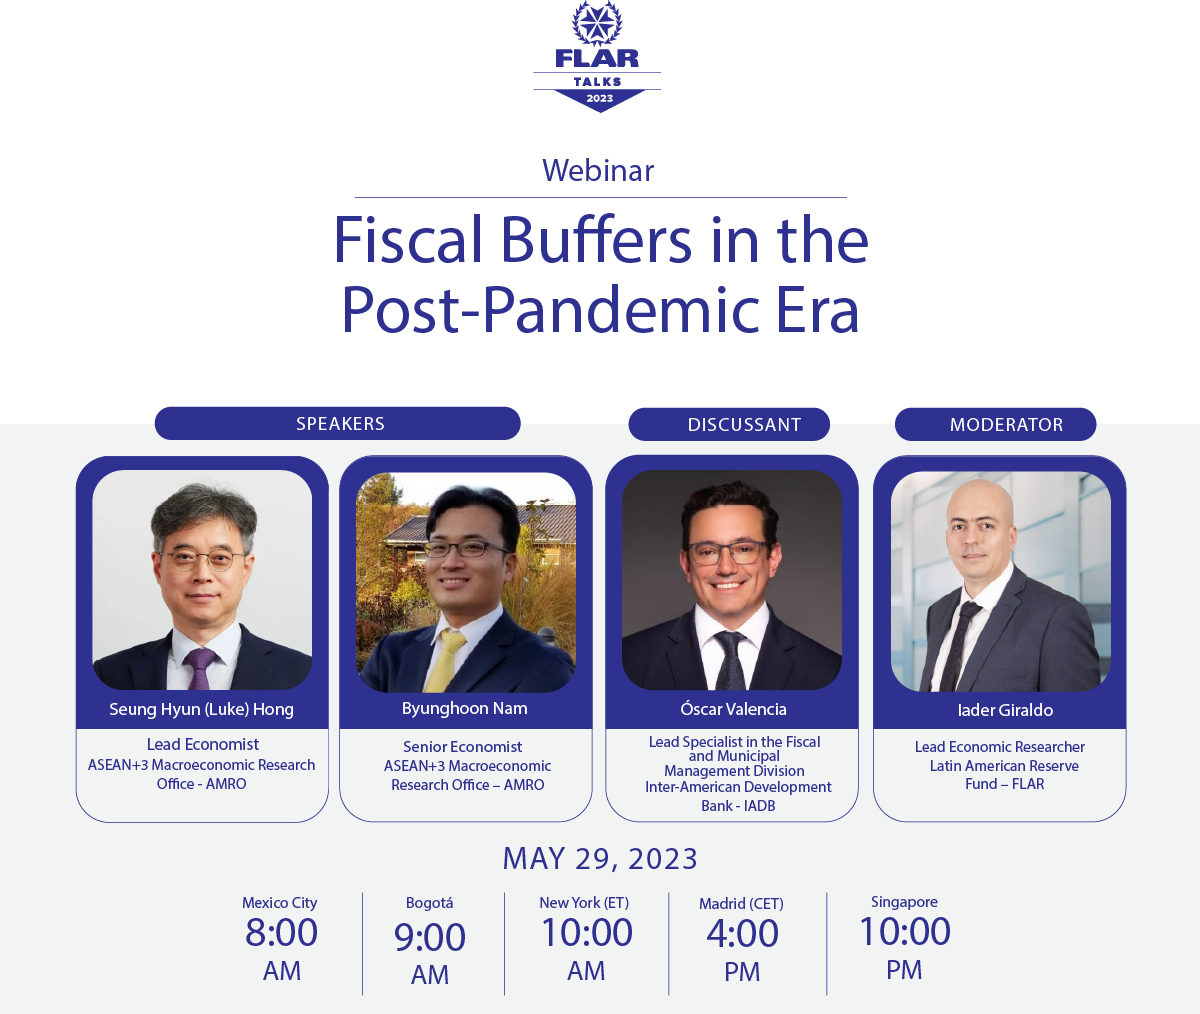 Fiscal Buffers in the Post-Pandemic Era